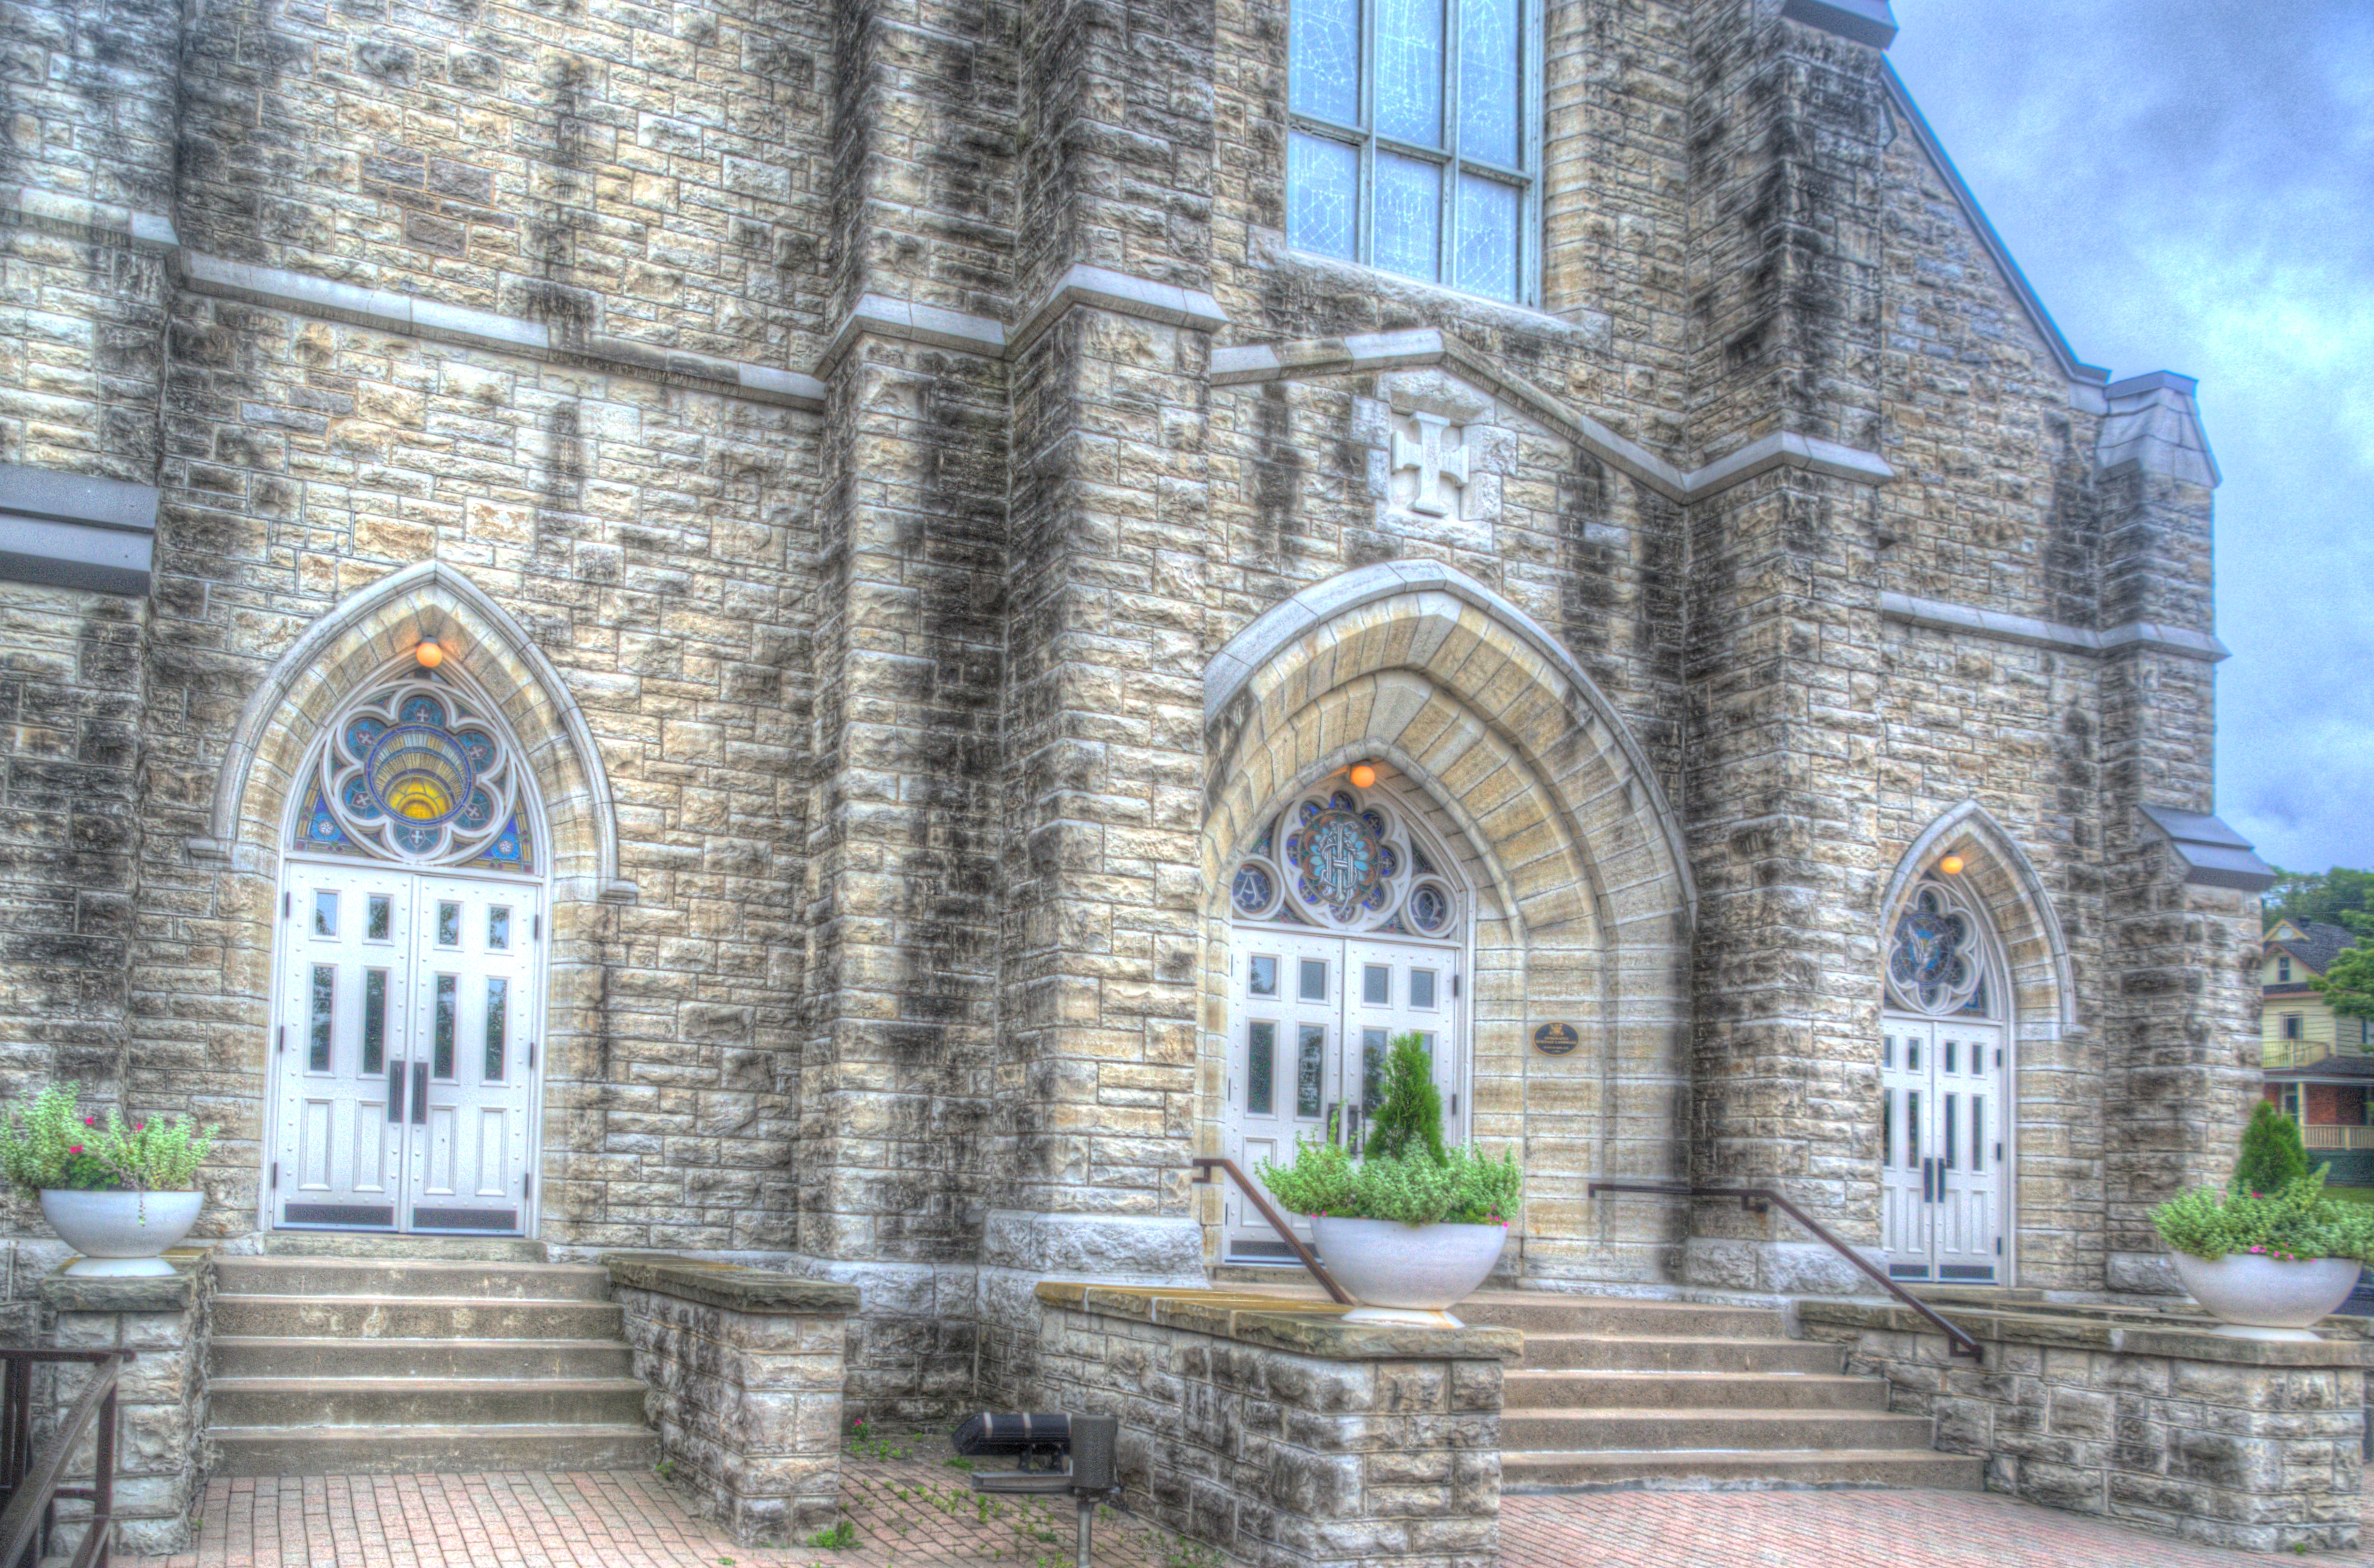 Outside image of St. Margaret's beautiful front doors with a stain glass above the doors.